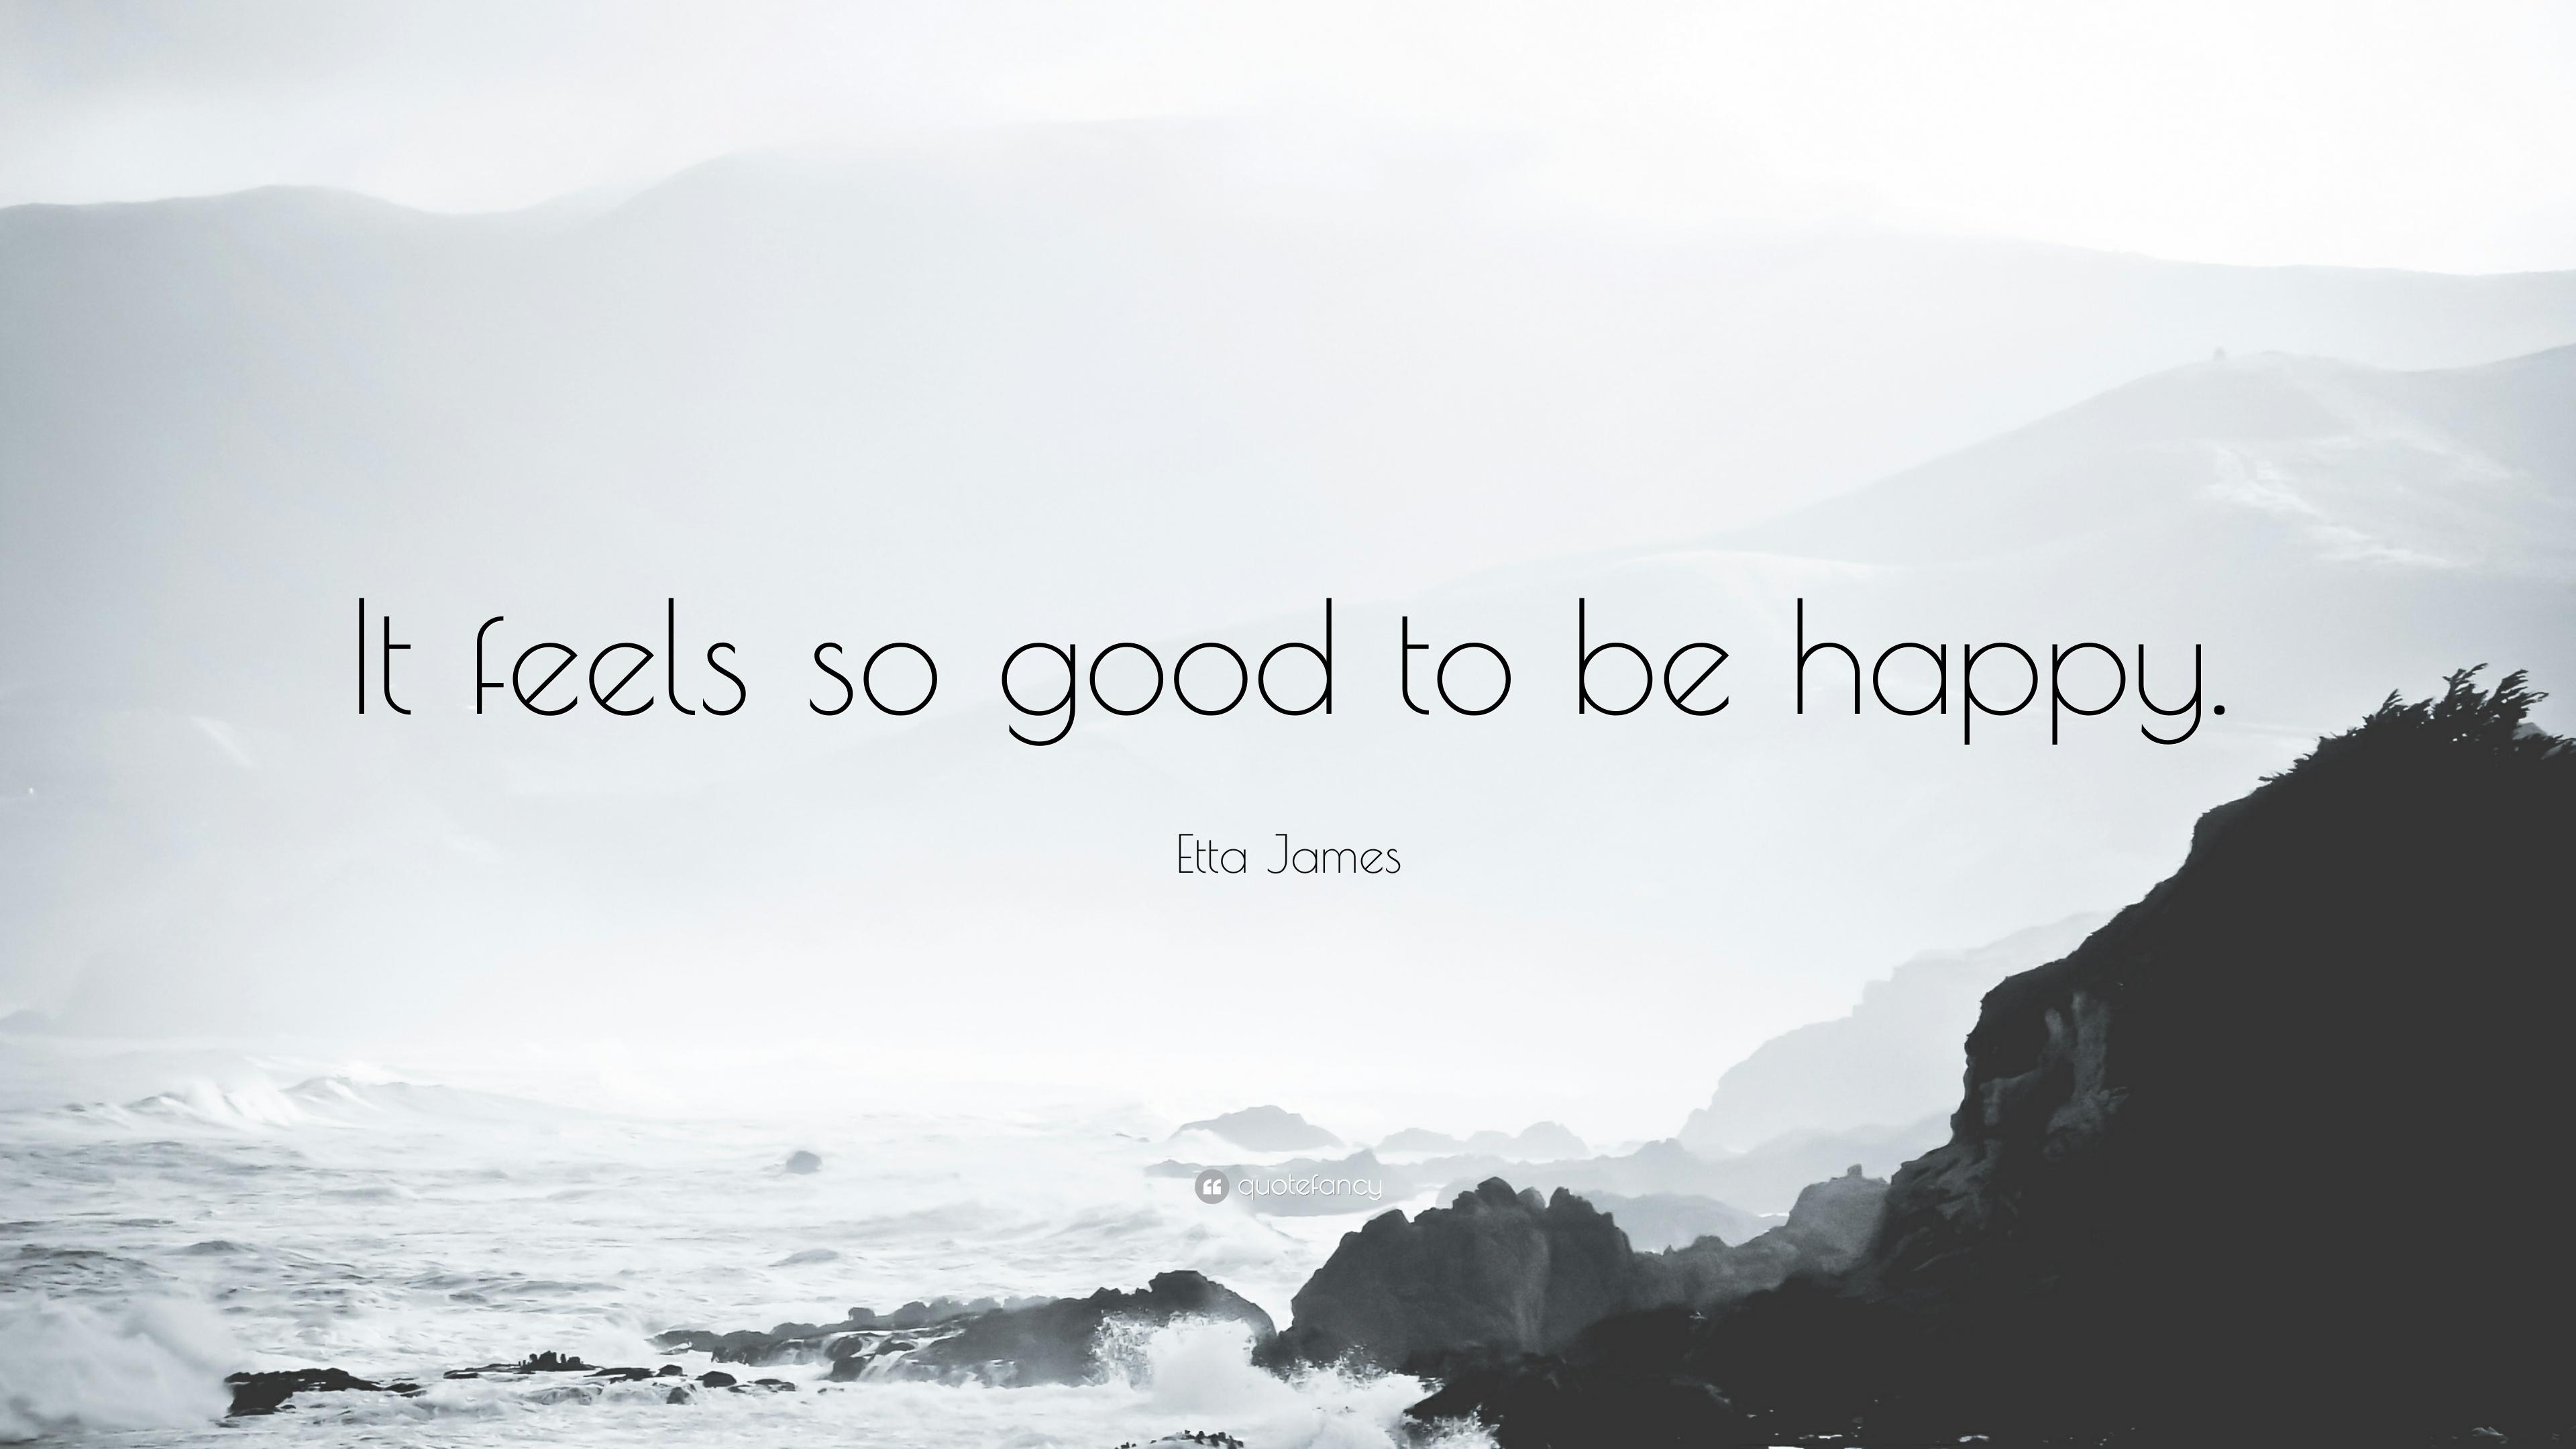 Etta James Quote: “It feels so good to be happy.” 9 wallpaper